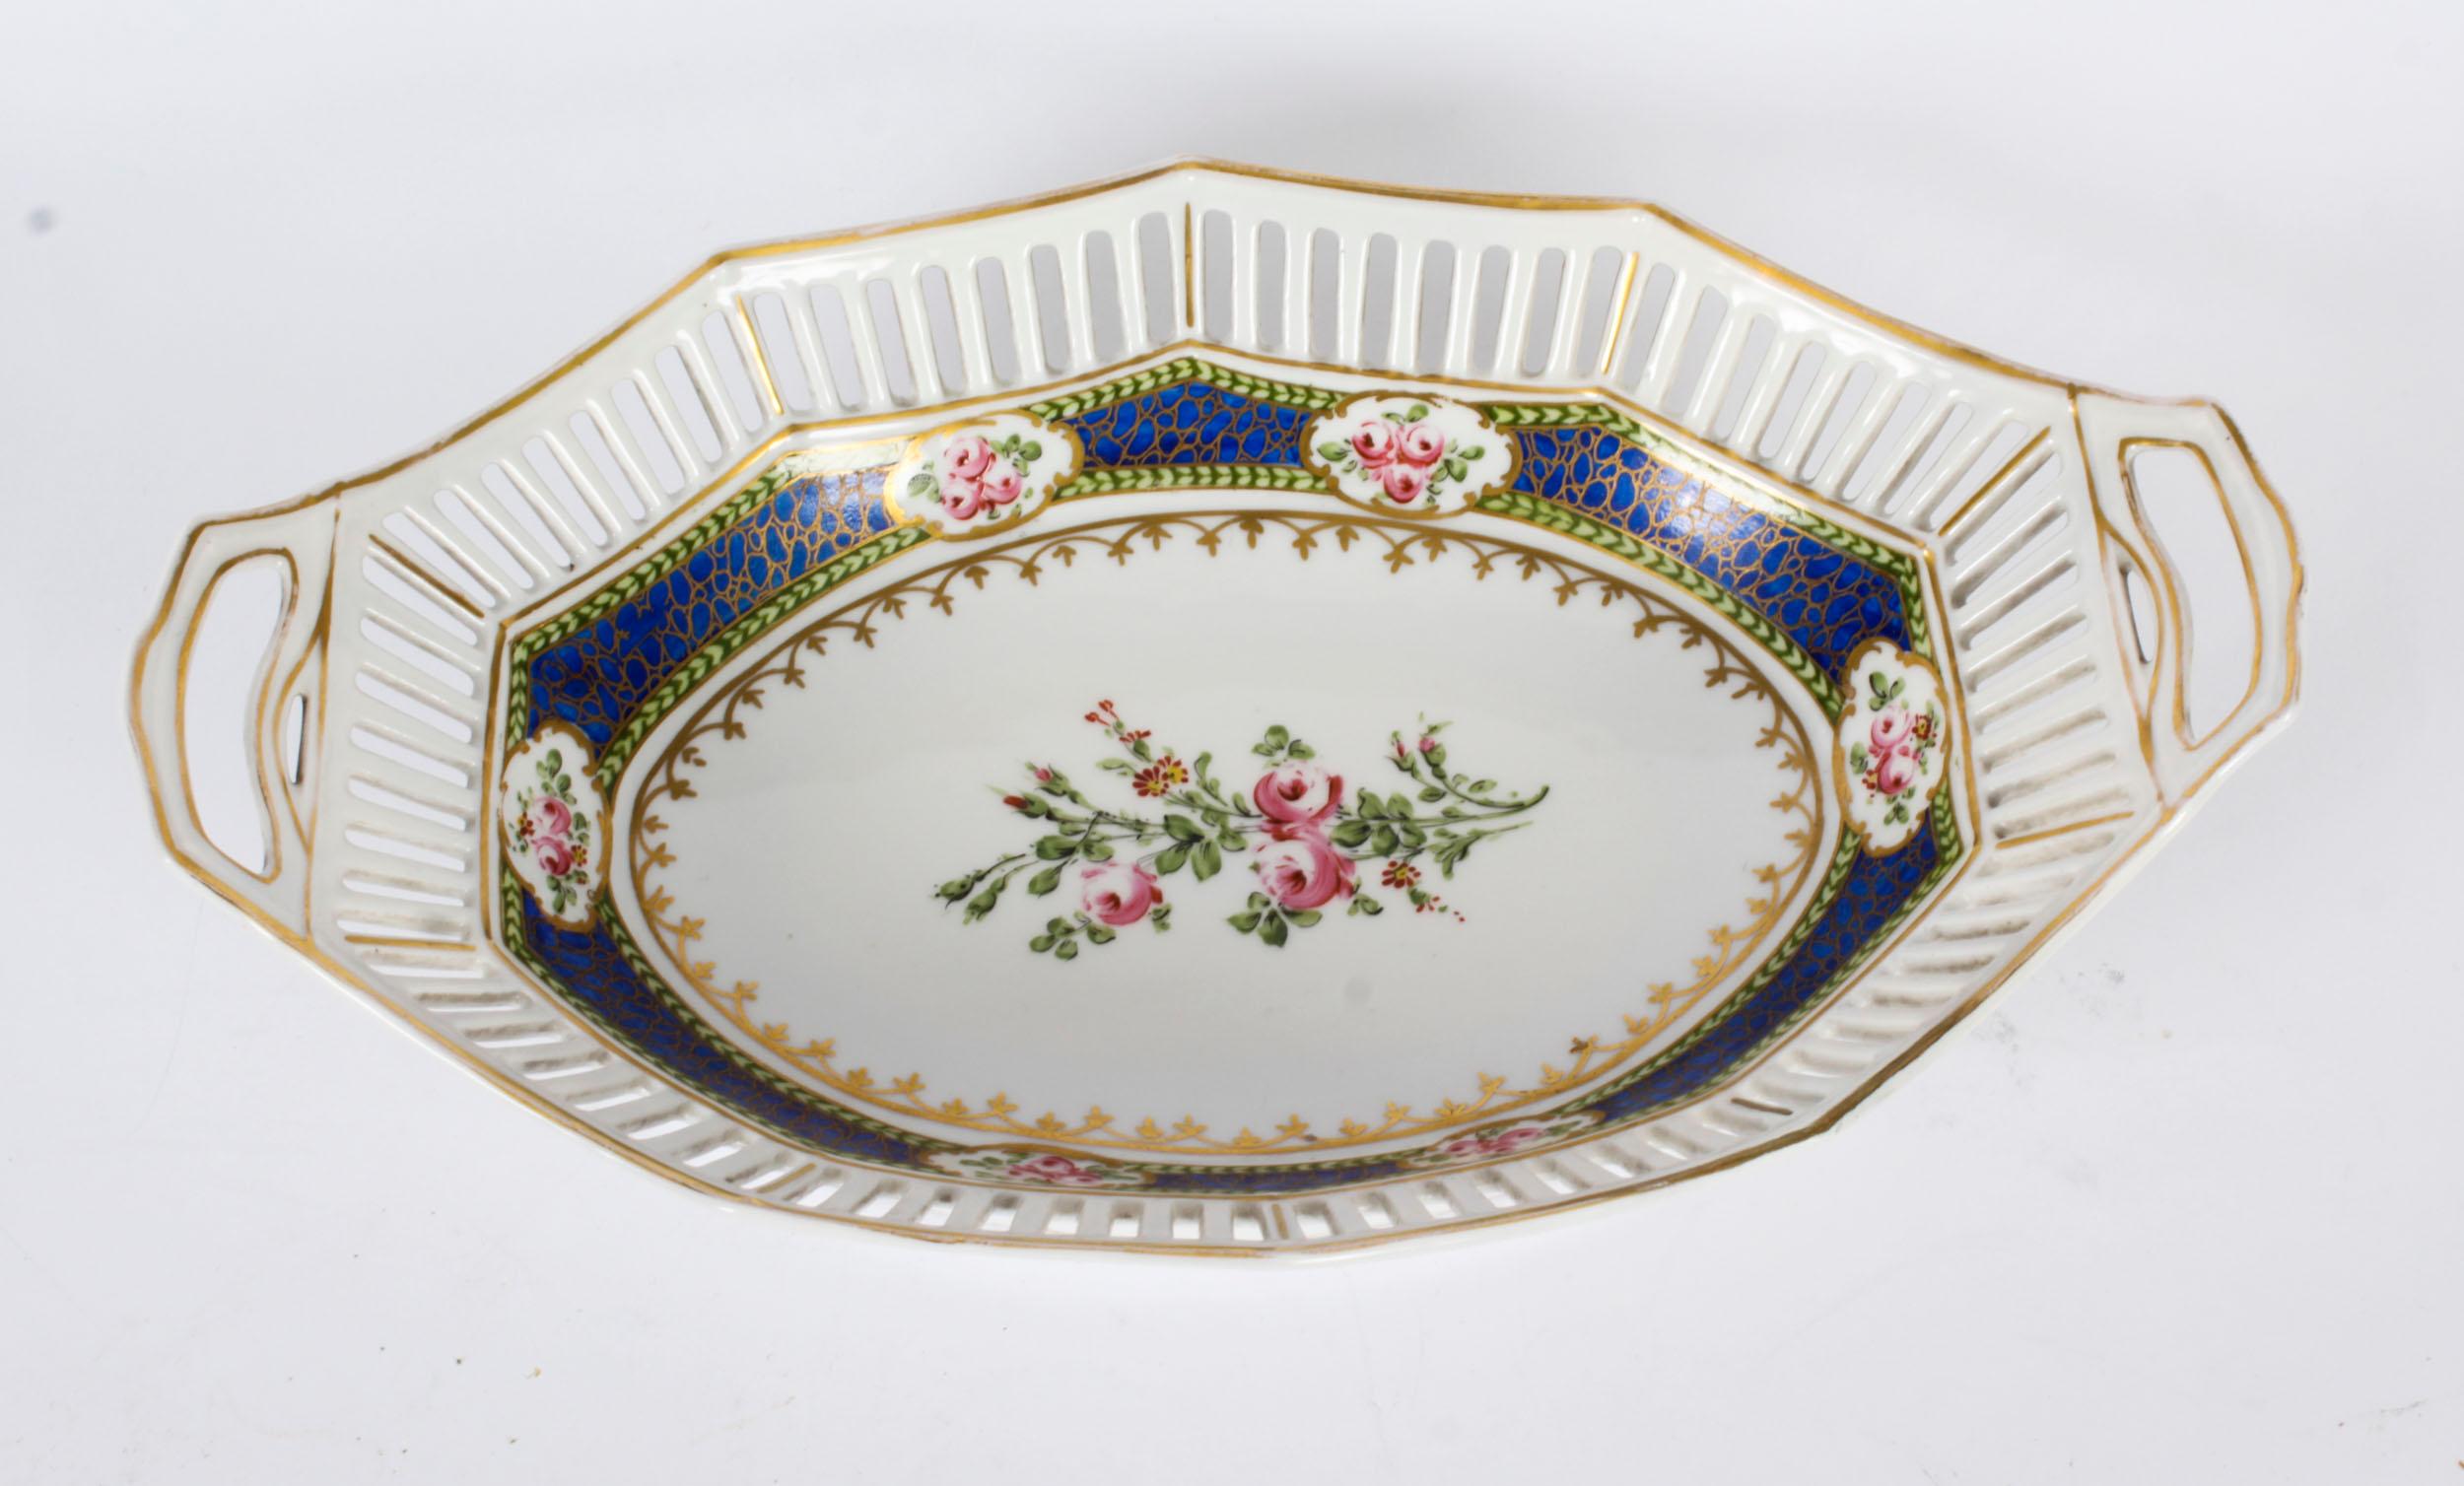 This is a decorative antique French Sevres oval porcelain dish, dating from Circa 1880.

The oval pierced borderwith gilt highlights with a striking Bleu Royal inner border, the centre masterfully hand painted with flowers, the border interspersed